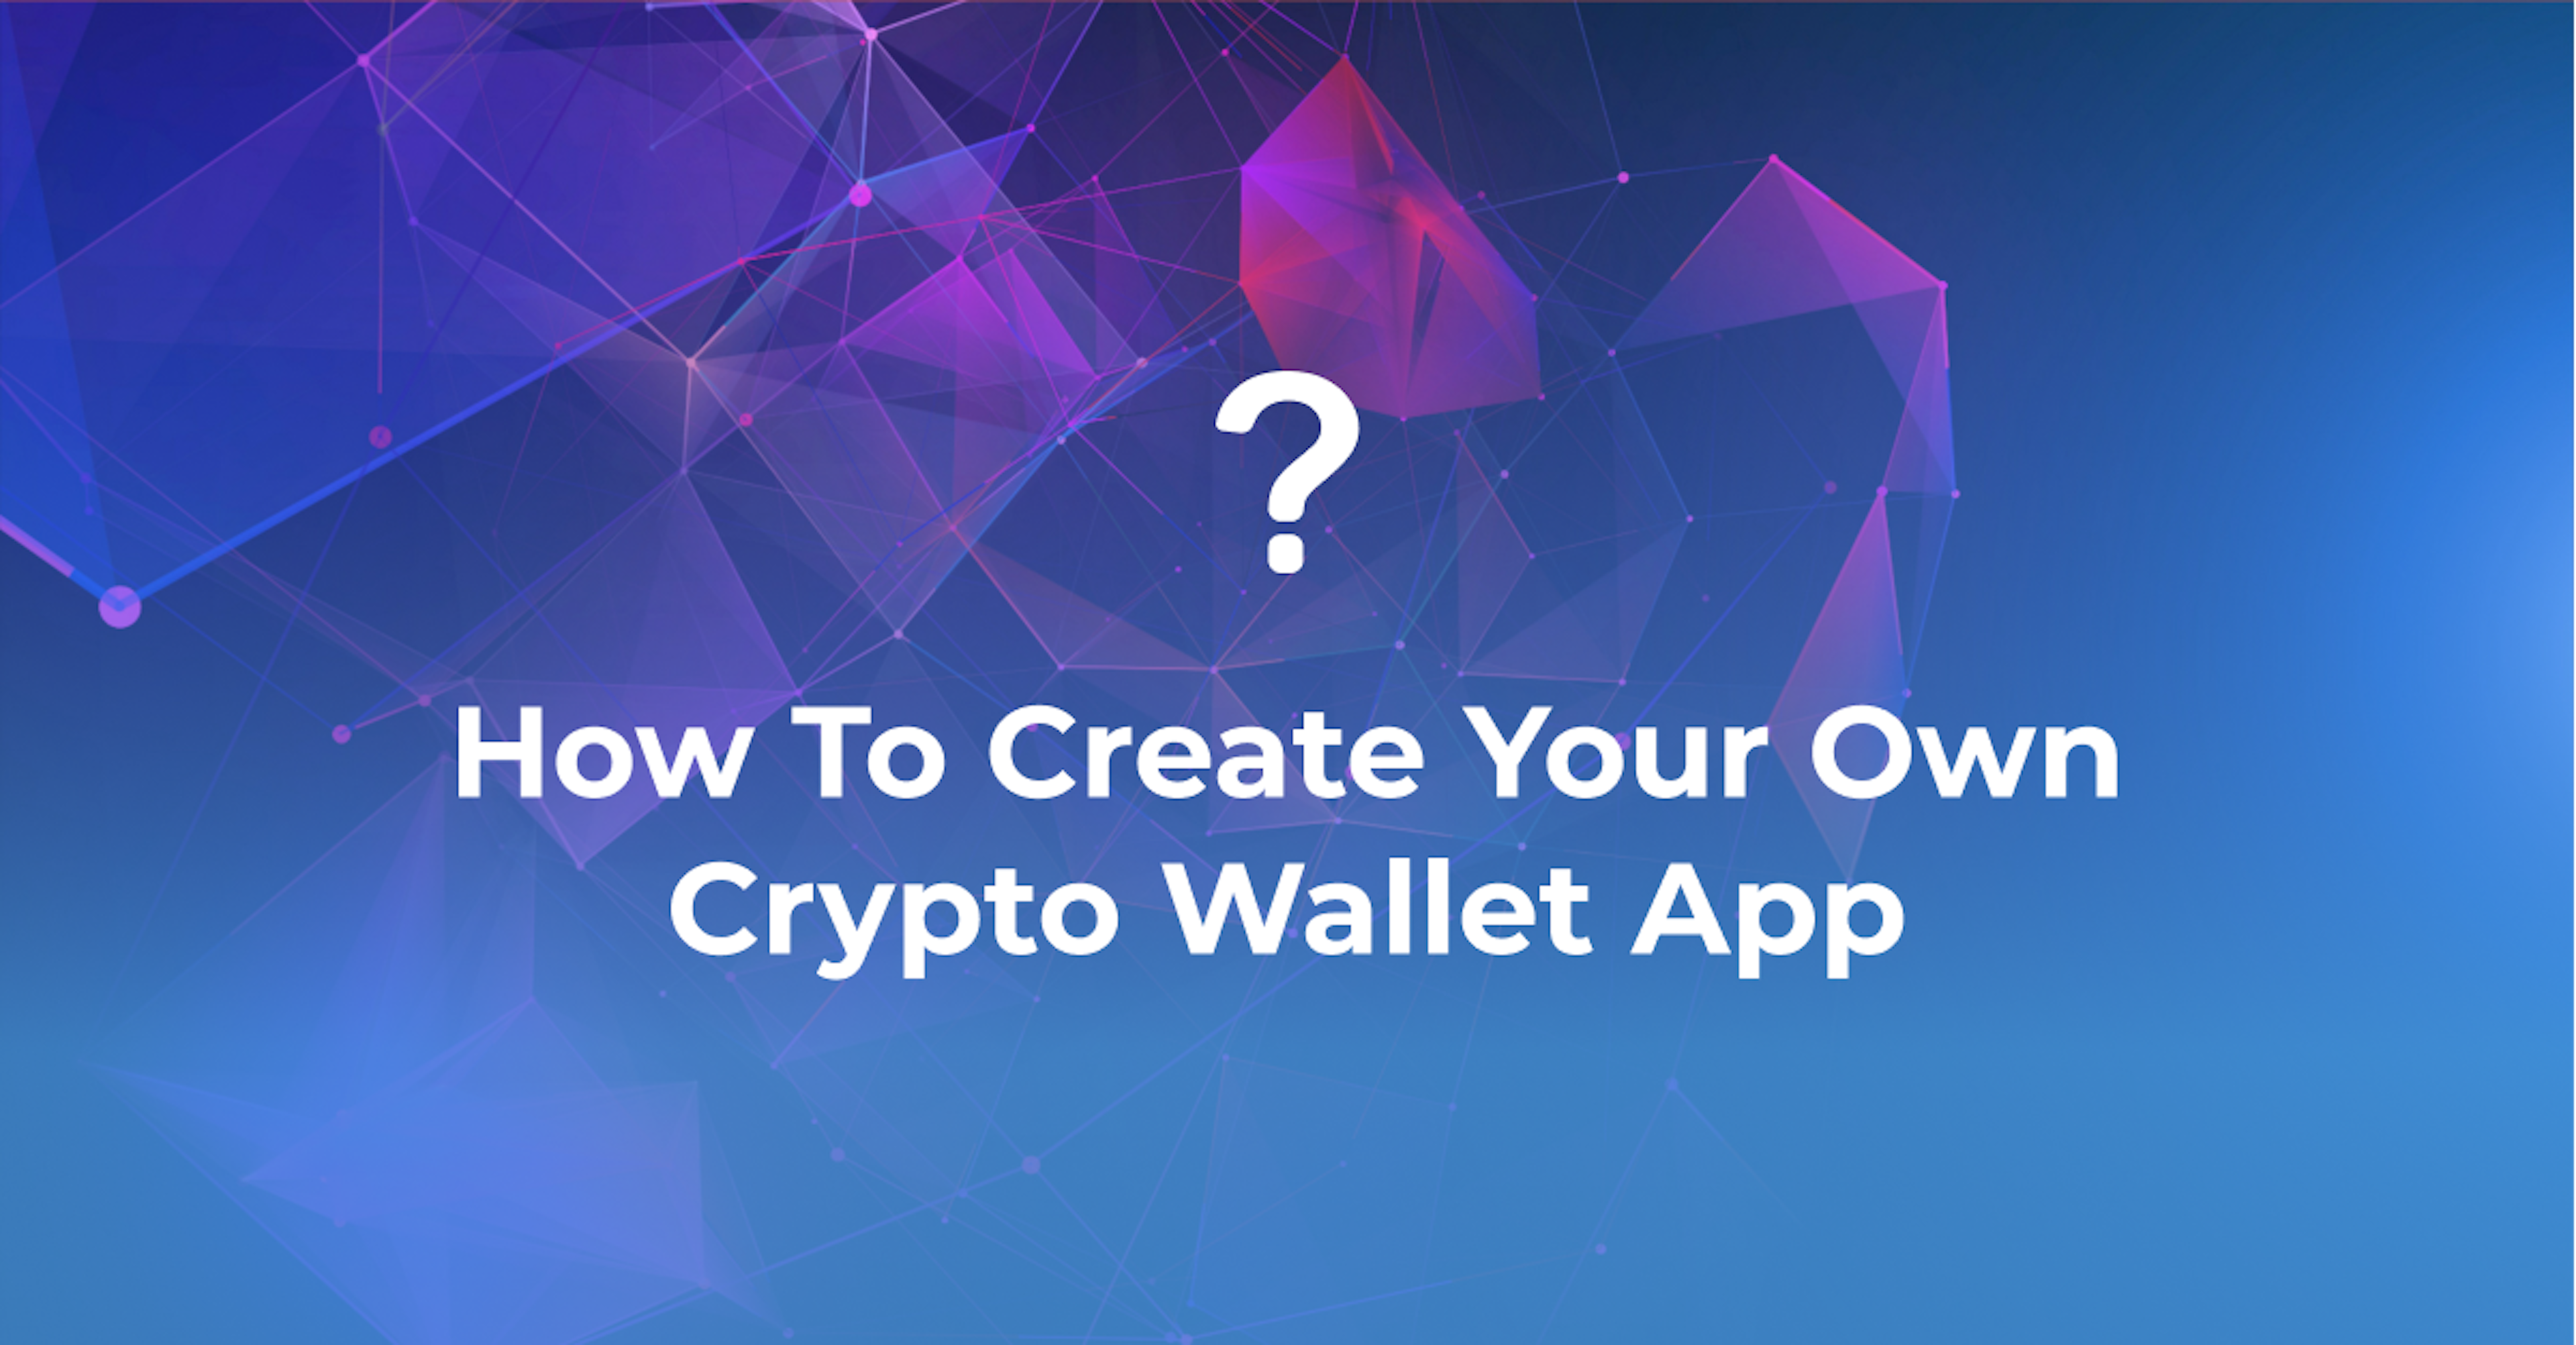 How To Create Your Own Crypto Wallet App | Easy Guide